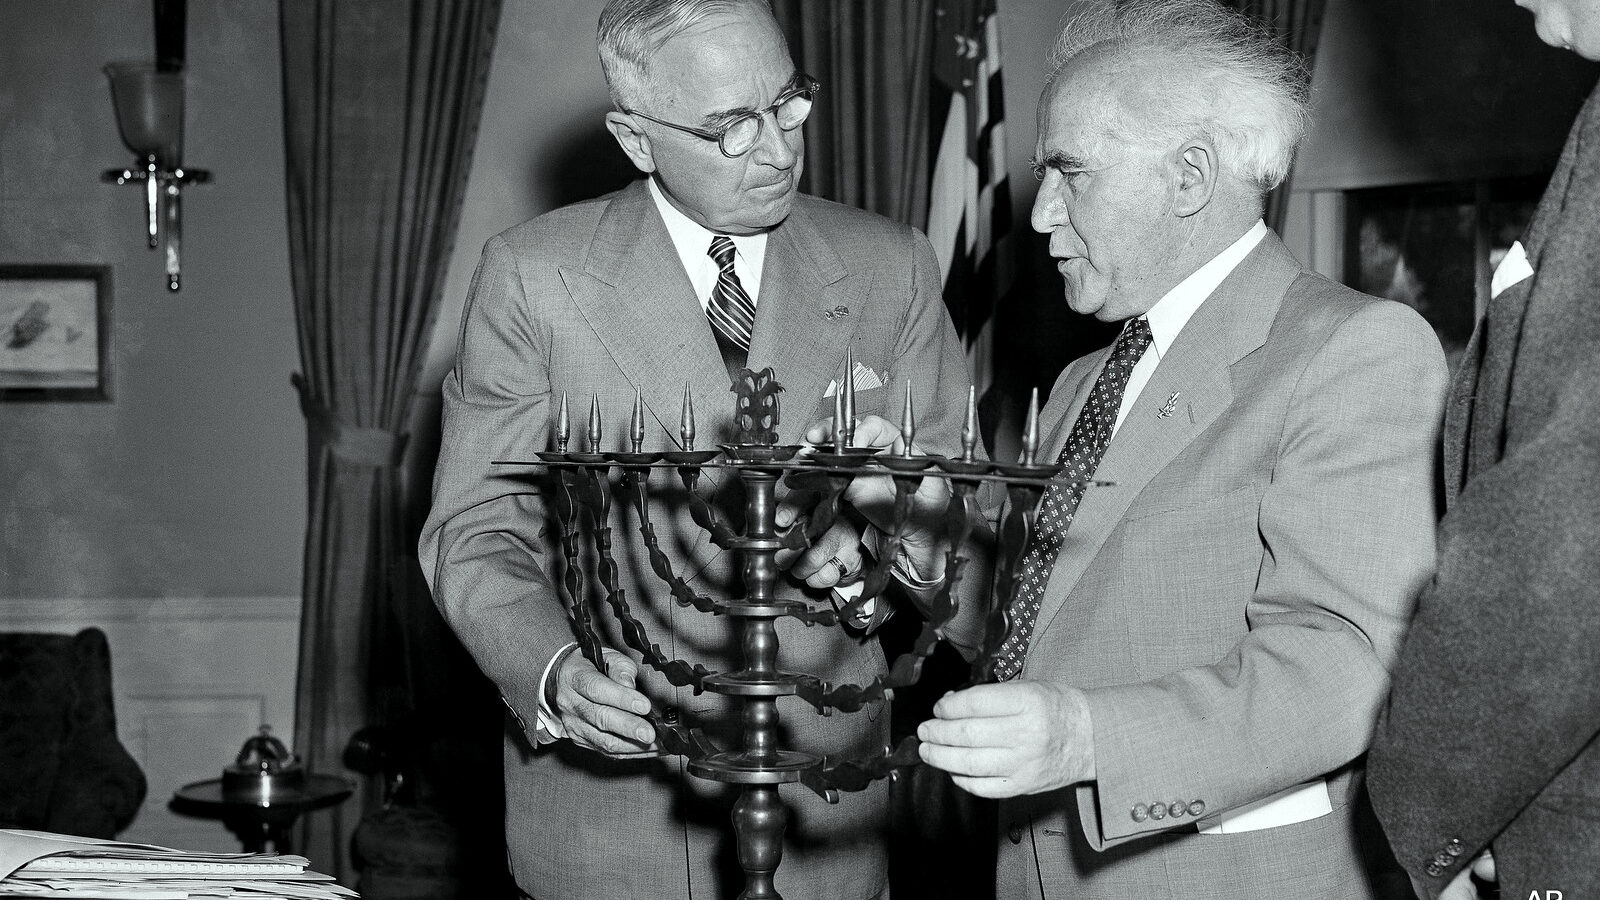 President Harry Truman receives an ornate bronze menorah as a birthday gift from David Ben-Gurion, prime minister of Israel, who called on the chief executive to discuss peace and economic development in the Middle East, May 8, 1951. Ben-Gurion said the menorah was made in 1767. This is the president's 67th birthday. (AP Photo/Henry Griffin)